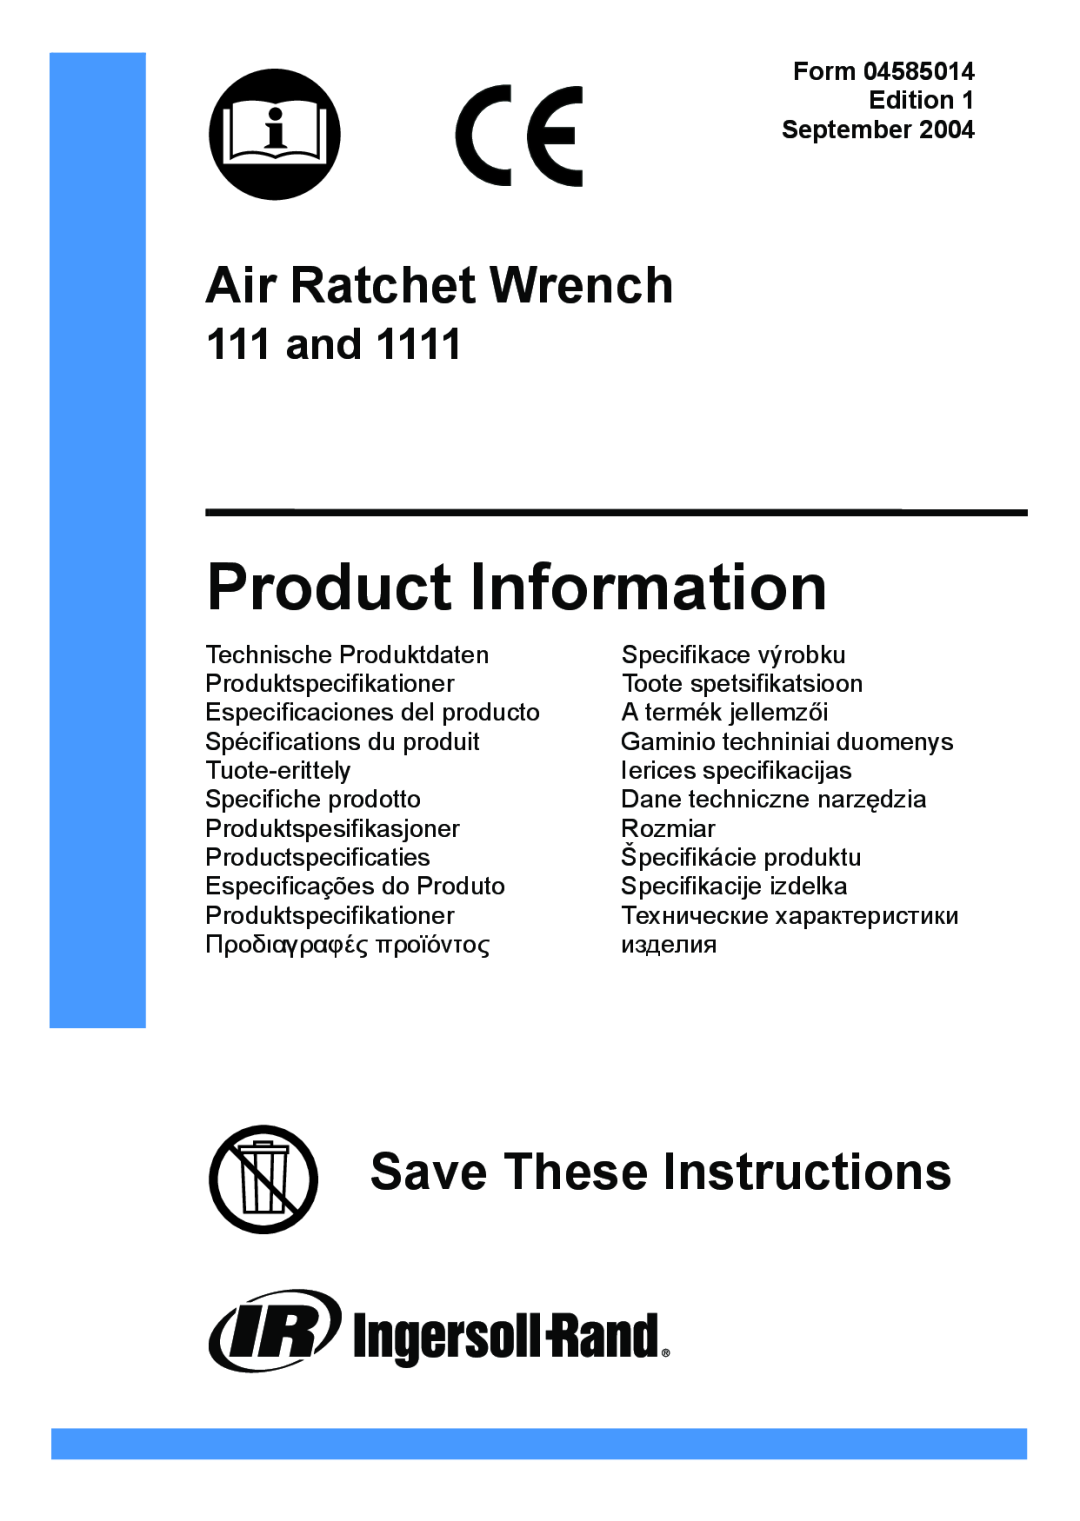 Ingersoll-Rand 1111 manual Form Edition September, Product Information, Air Ratchet Wrench, Save These Instructions 